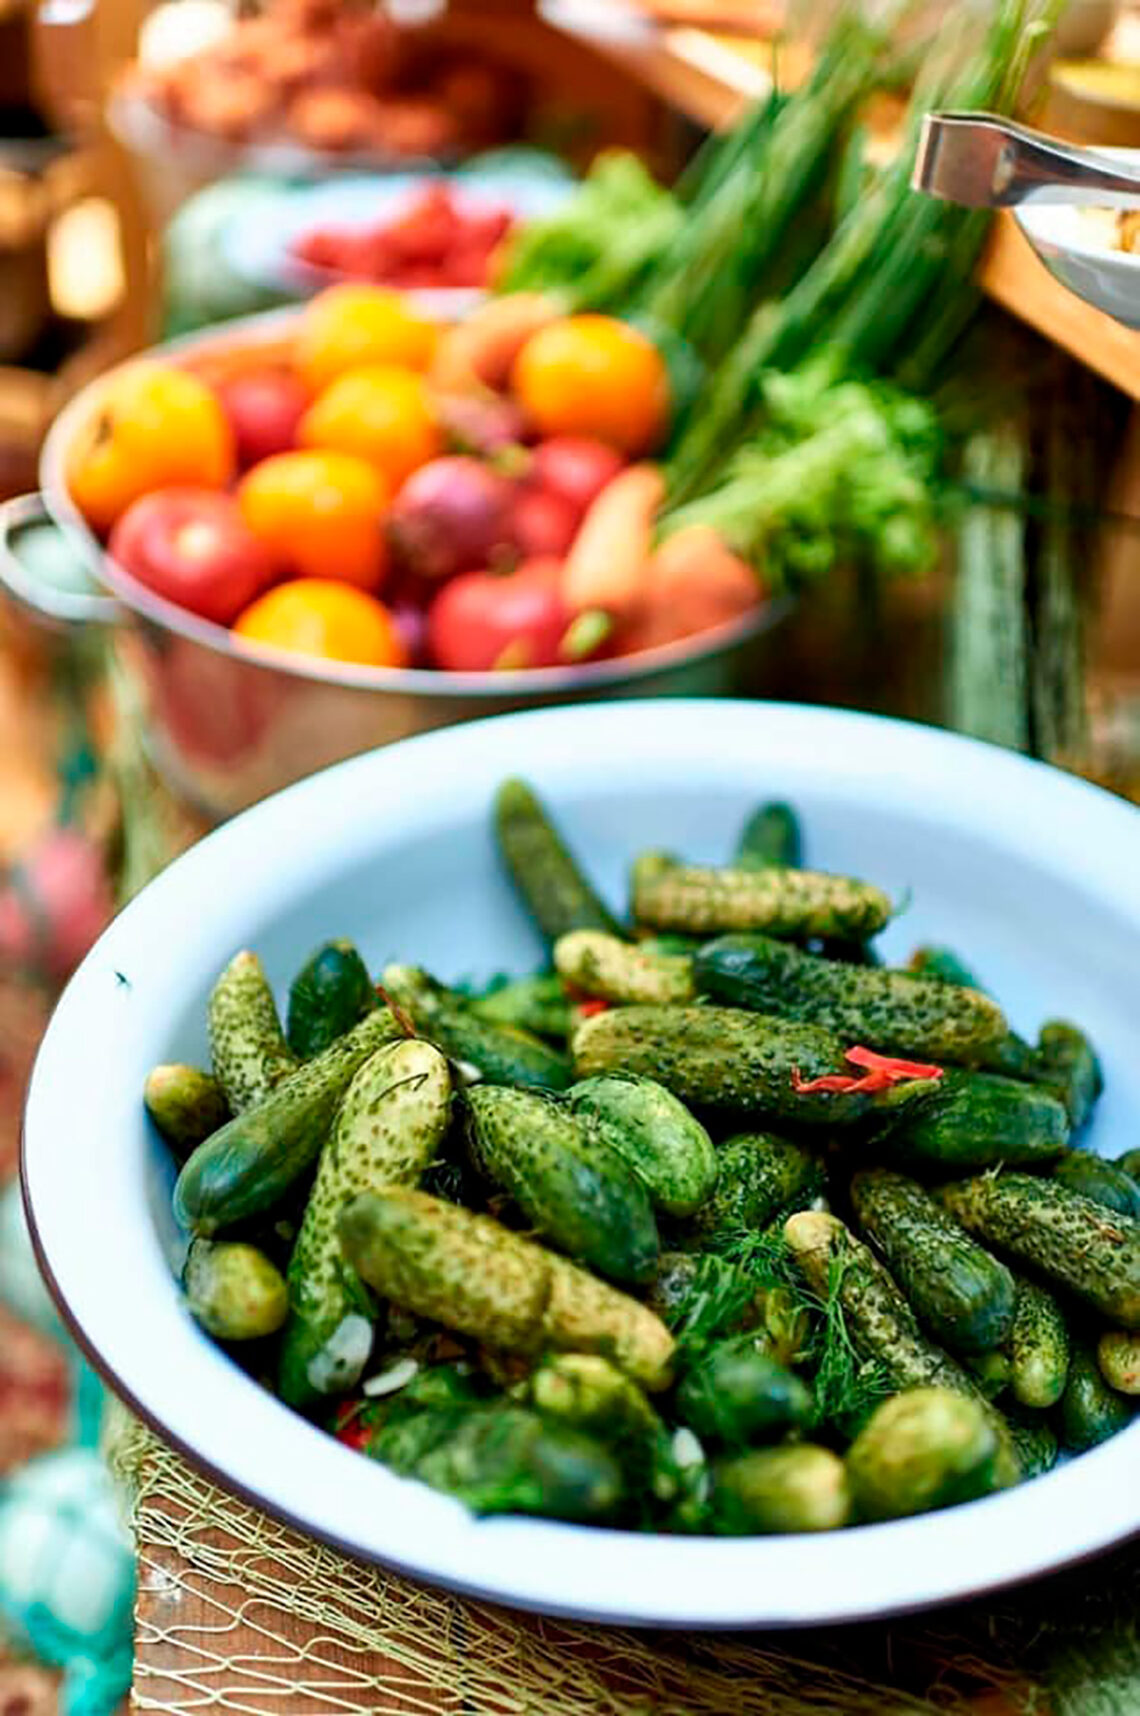 Odessa “5 minutes” pickled cucumbers. Cooking tips from famous chefs.